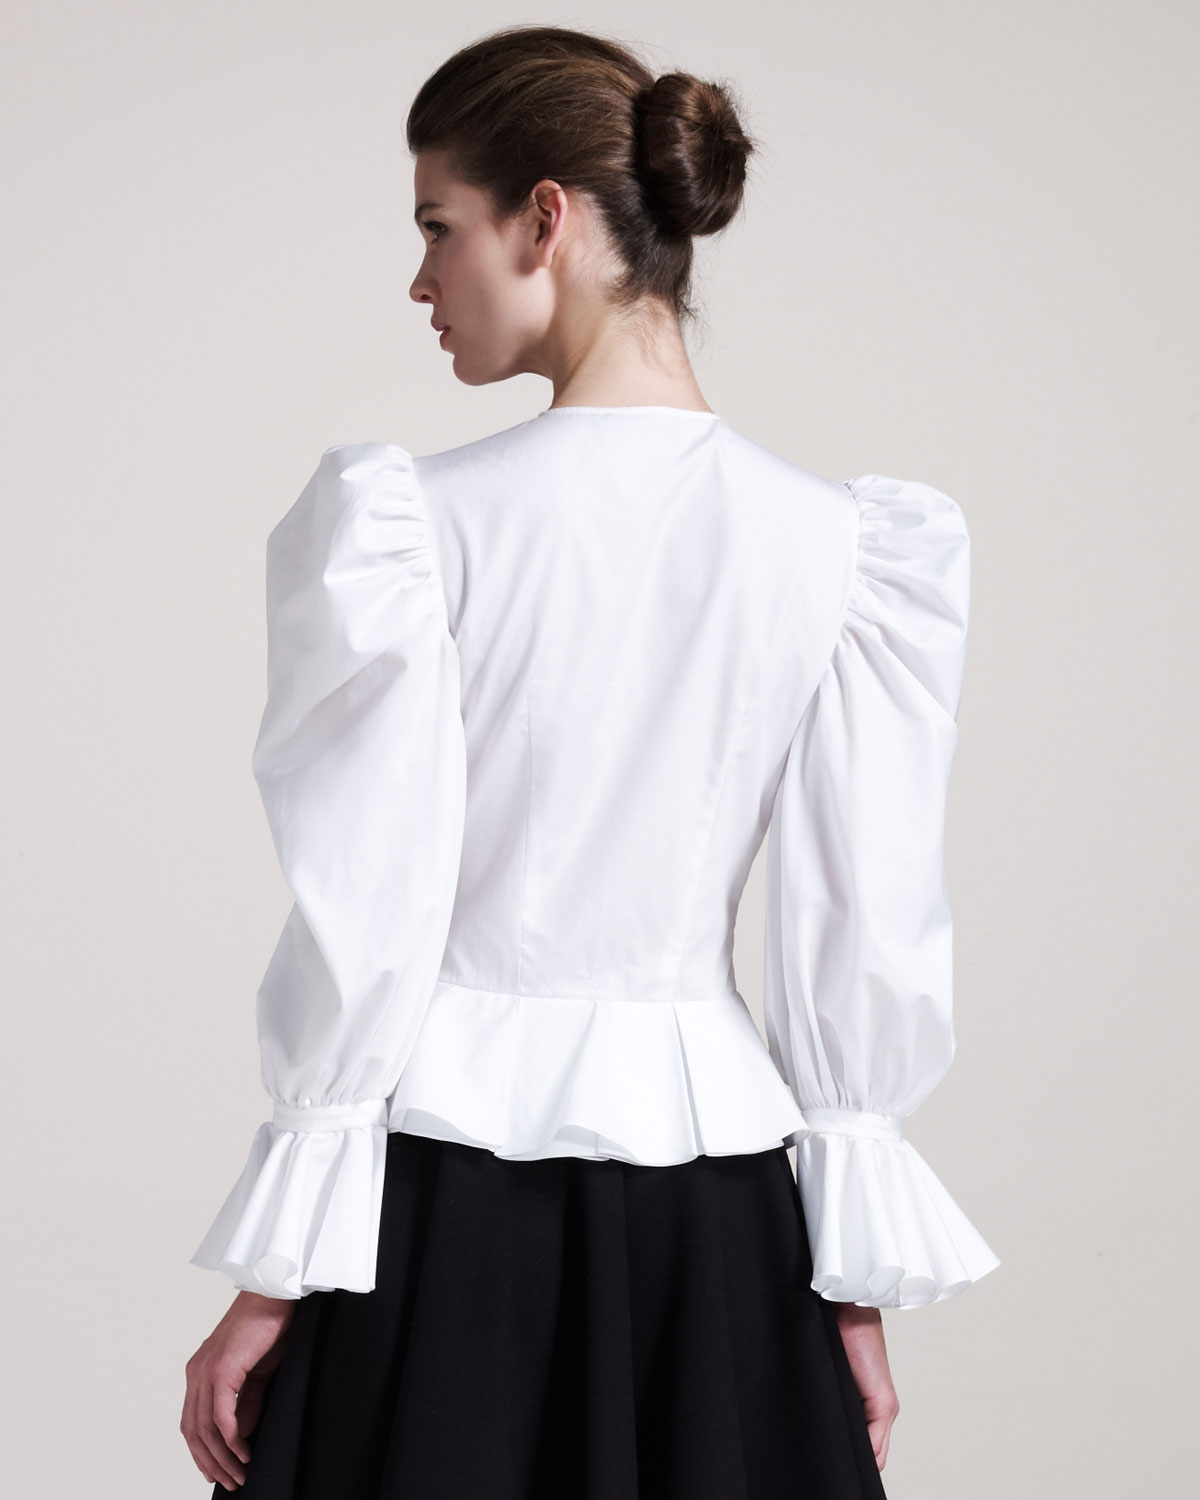 Lyst - Alexander Mcqueen Puffed-Sleeve Blouse in White